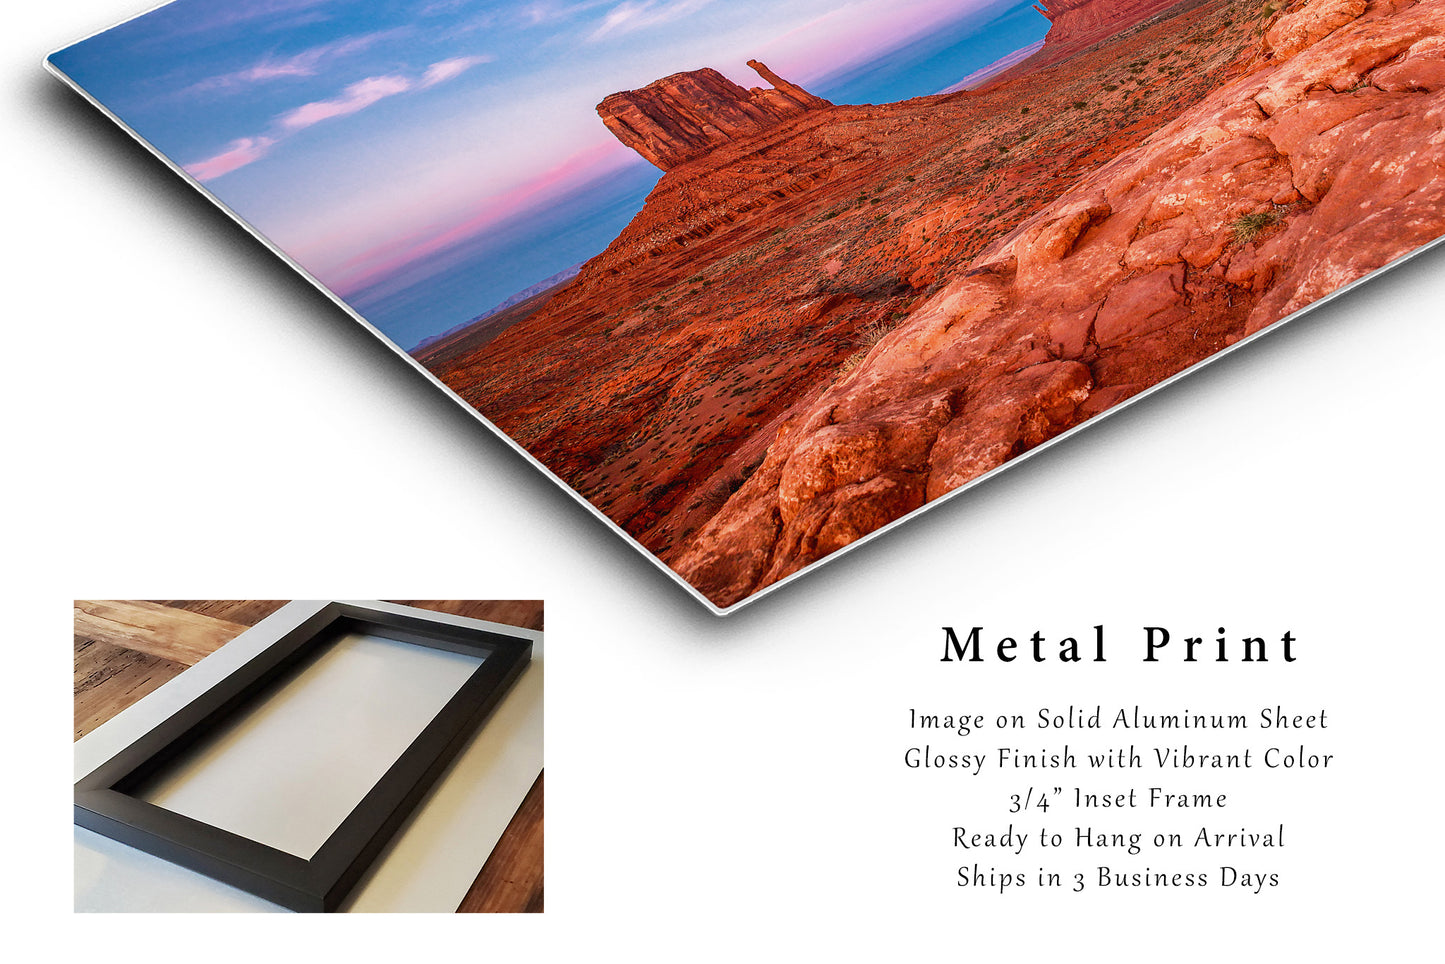 Western Metal Print - Picture of Scenic Sunset over Monument Valley in Arizona Utah - Ready to Hang Southwestern Wall Art Photo Decor